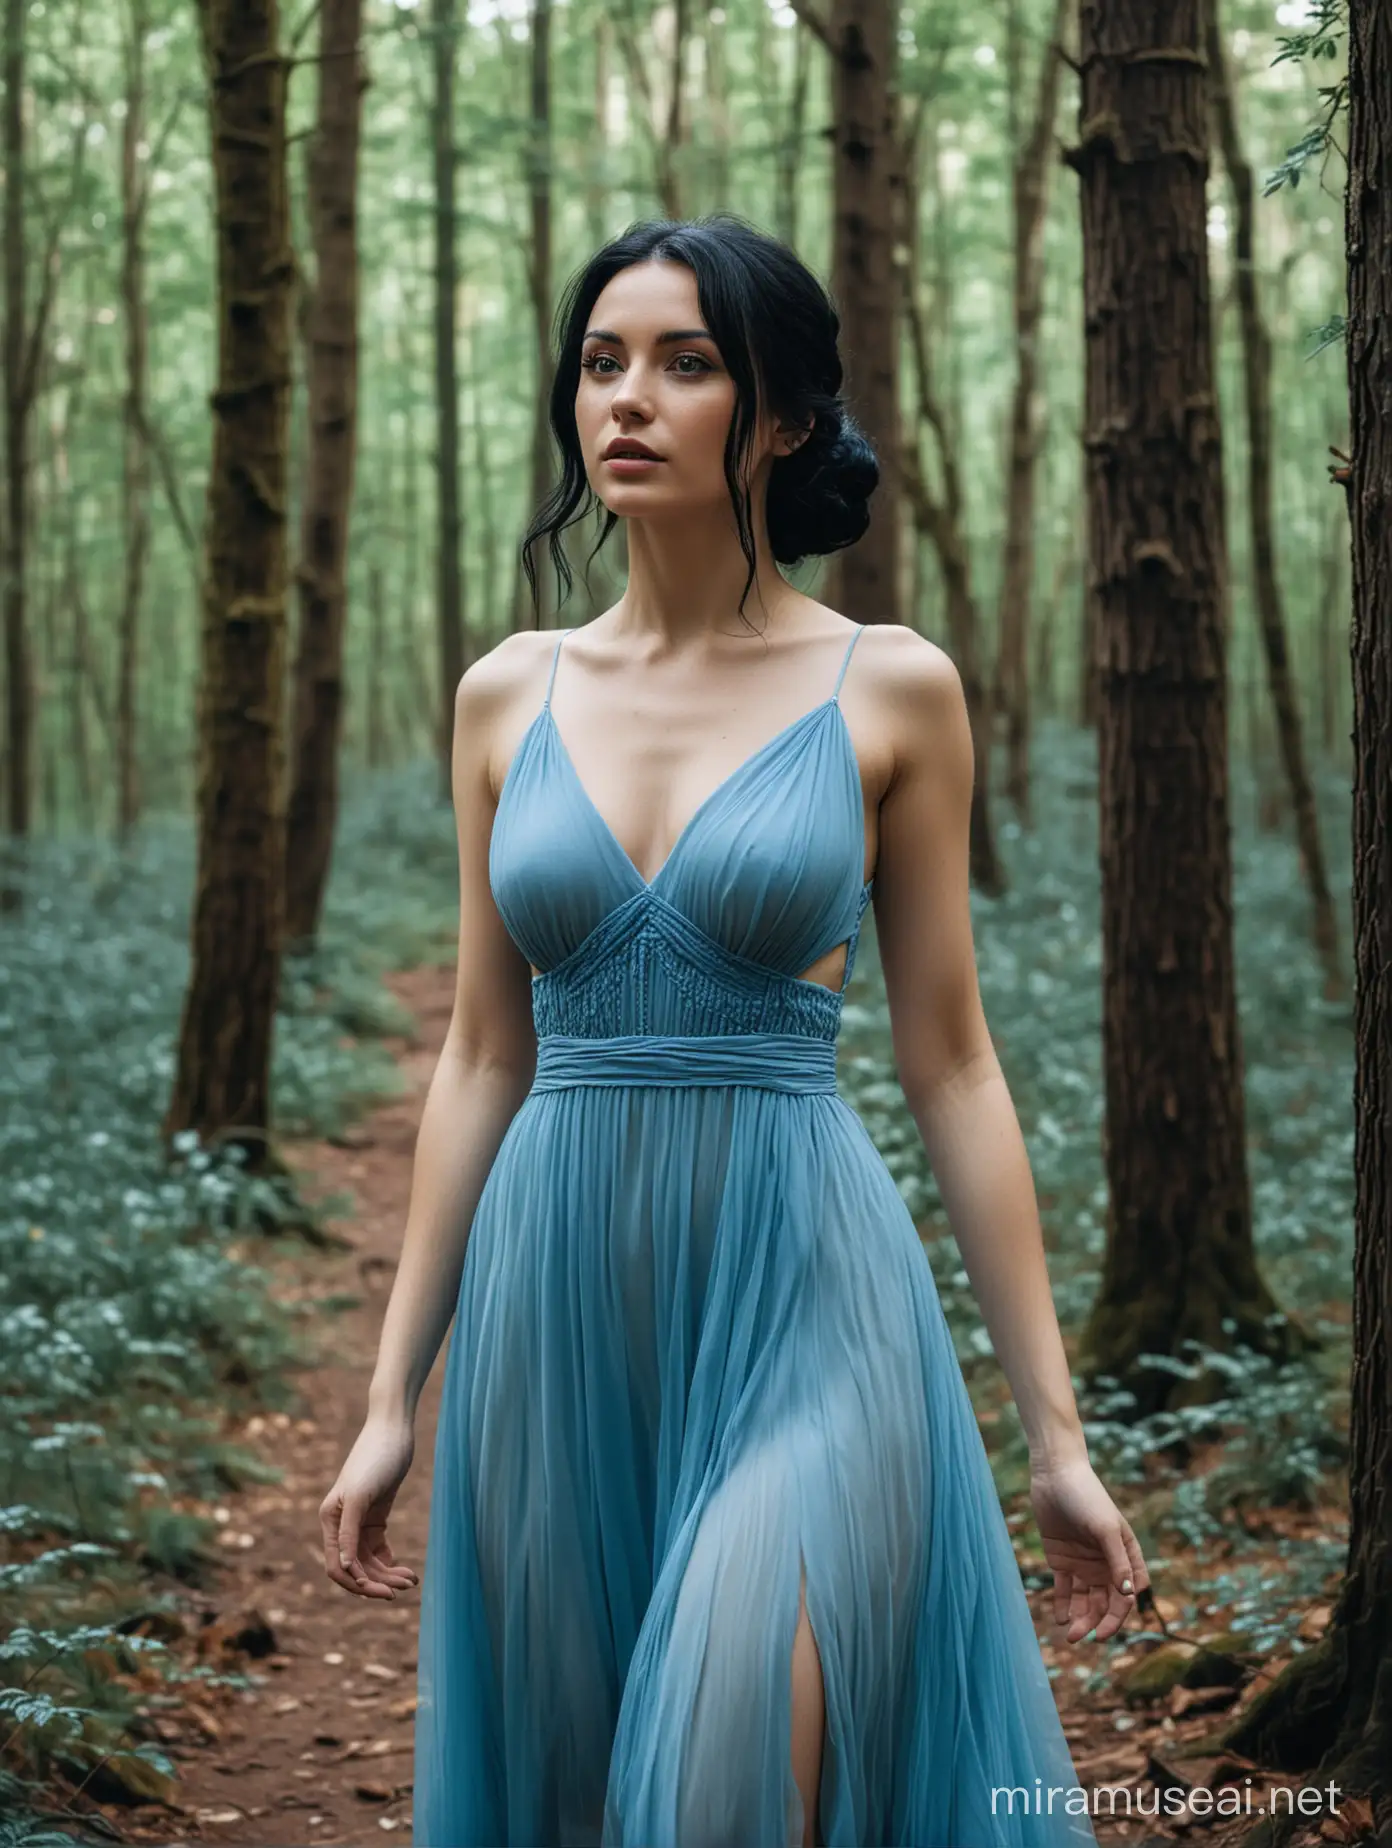 Enchanting Woman in Blue Dress Amidst Forest Serenity